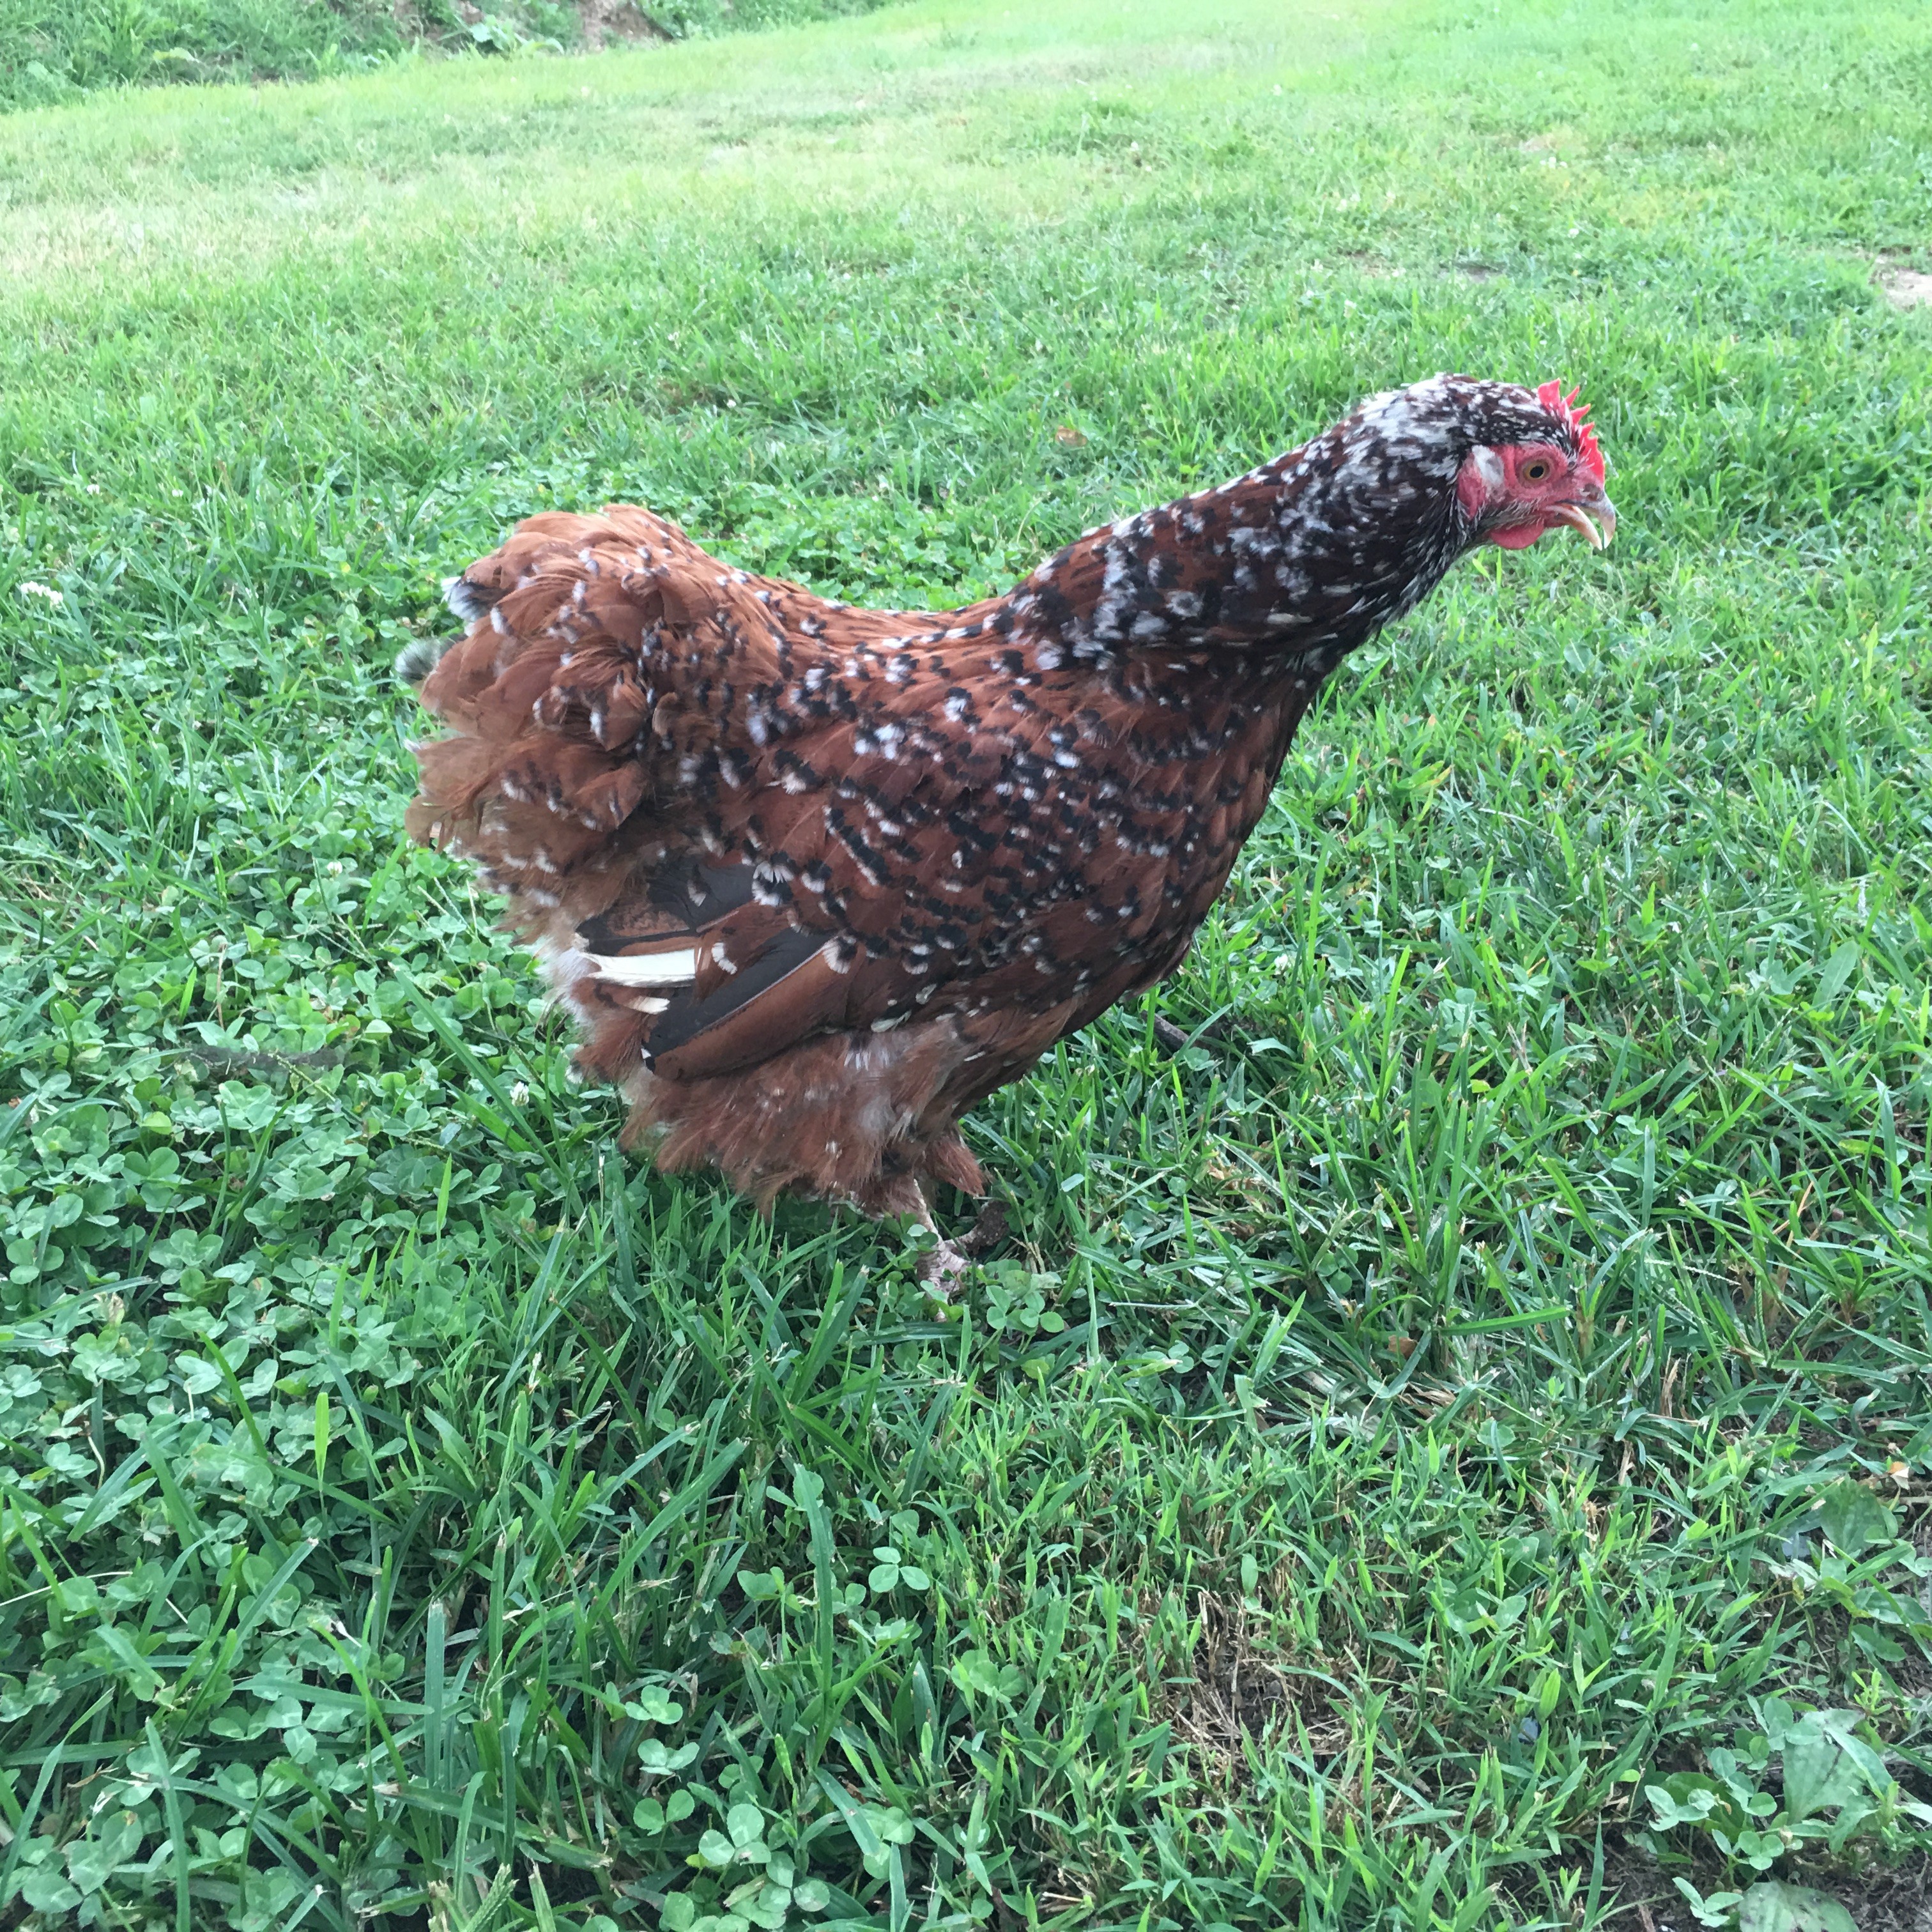 Jubilee Orpington Chicken For Sale | Cackle Hatchery